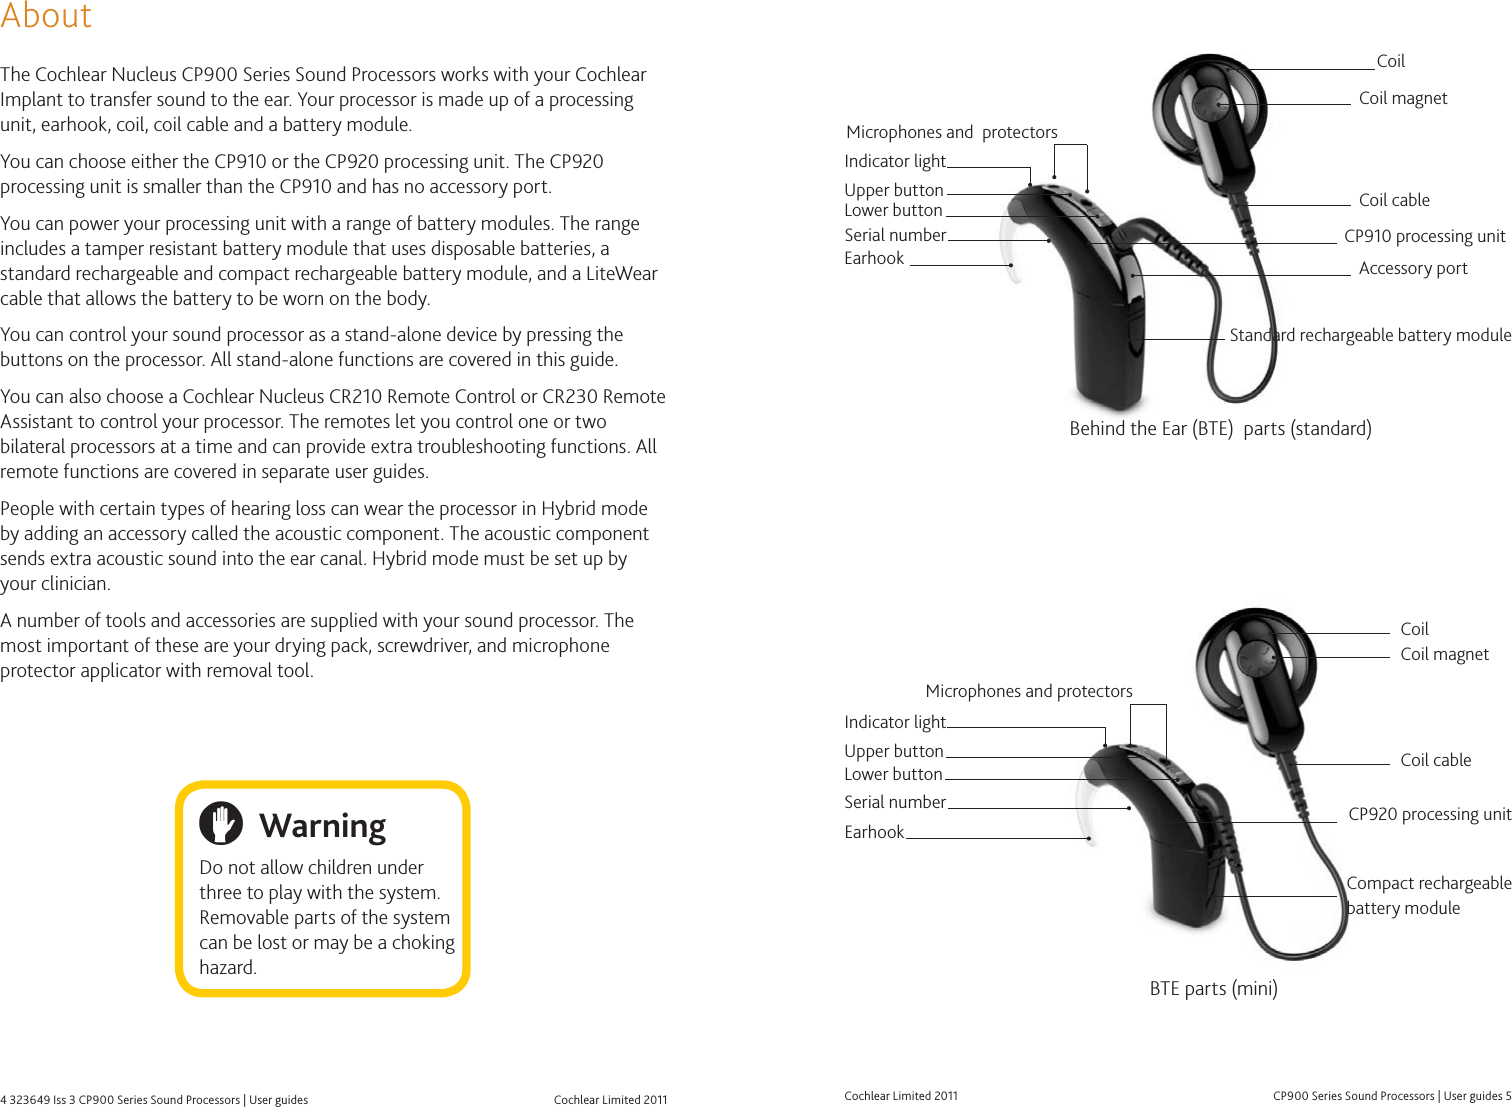 Cochlear Limited 20114 323649 Iss 3 CP900 Series Sound Processors | User guides  CP900 Series Sound Processors | User guides 5Cochlear Limited 2011AboutThe Cochlear Nucleus CP900 Series Sound Processors works with your Cochlear Implant to transfer sound to the ear. Your processor is made up of a processing unit, earhook, coil, coil cable and a battery module. You can choose either the CP910 or the CP920 processing unit. The CP920 processing unit is smaller than the CP910 and has no accessory port.You can power your processing unit with a range of battery modules. The range includes a tamper resistant battery module that uses disposable batteries, a standard rechargeable and compact rechargeable battery module, and a LiteWear cable that allows the battery to be worn on the body.You can control your sound processor as a stand-alone device by pressing the buttons on the processor. All stand-alone functions are covered in this guide.You can also choose a Cochlear Nucleus CR210 Remote Control or CR230 Remote Assistant to control your processor. The remotes let you control one or two bilateral processors at a time and can provide extra troubleshooting functions. All remote functions are covered in separate user guides. People with certain types of hearing loss can wear the processor in Hybrid mode by adding an accessory called the acoustic component. The acoustic component sends extra acoustic sound into the ear canal. Hybrid mode must be set up by your clinician. A number of tools and accessories are supplied with your sound processor. The most important of these are your drying pack, screwdriver, and microphone protector applicator with removal tool. WarningDo not allow children under three to play with the system. Removable parts of the system can be lost or may be a choking hazard.   Coil magnetCoil cableCoilCP910 processing unitProcessing unitStandard rechargeable battery moduleLower buttonEarhookUpper buttonAccessory portMicrophones and  protectorsMicrophones and protectorsSerial numberEarhookUpper buttonLower buttonCoil magnetCoilCoil cableCompact rechargeable battery moduleBehind the Ear (BTE)  parts (standard)BTE parts (mini)Serial numberIndicator lightIndicator lightCP920 processing unit